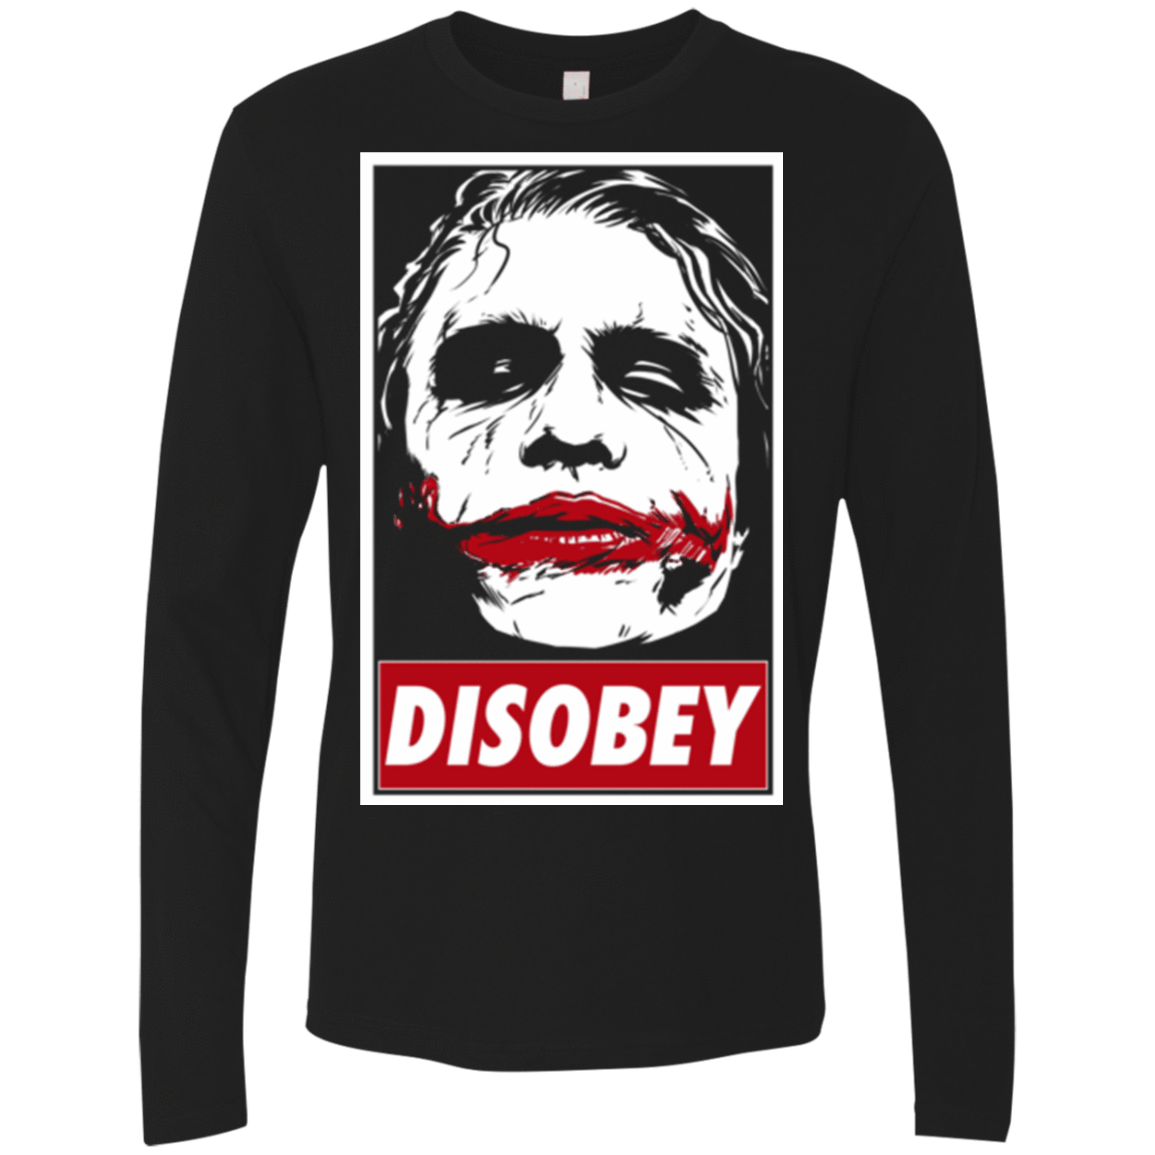 T-Shirts Black / Small Chaos and Disobey Men's Premium Long Sleeve